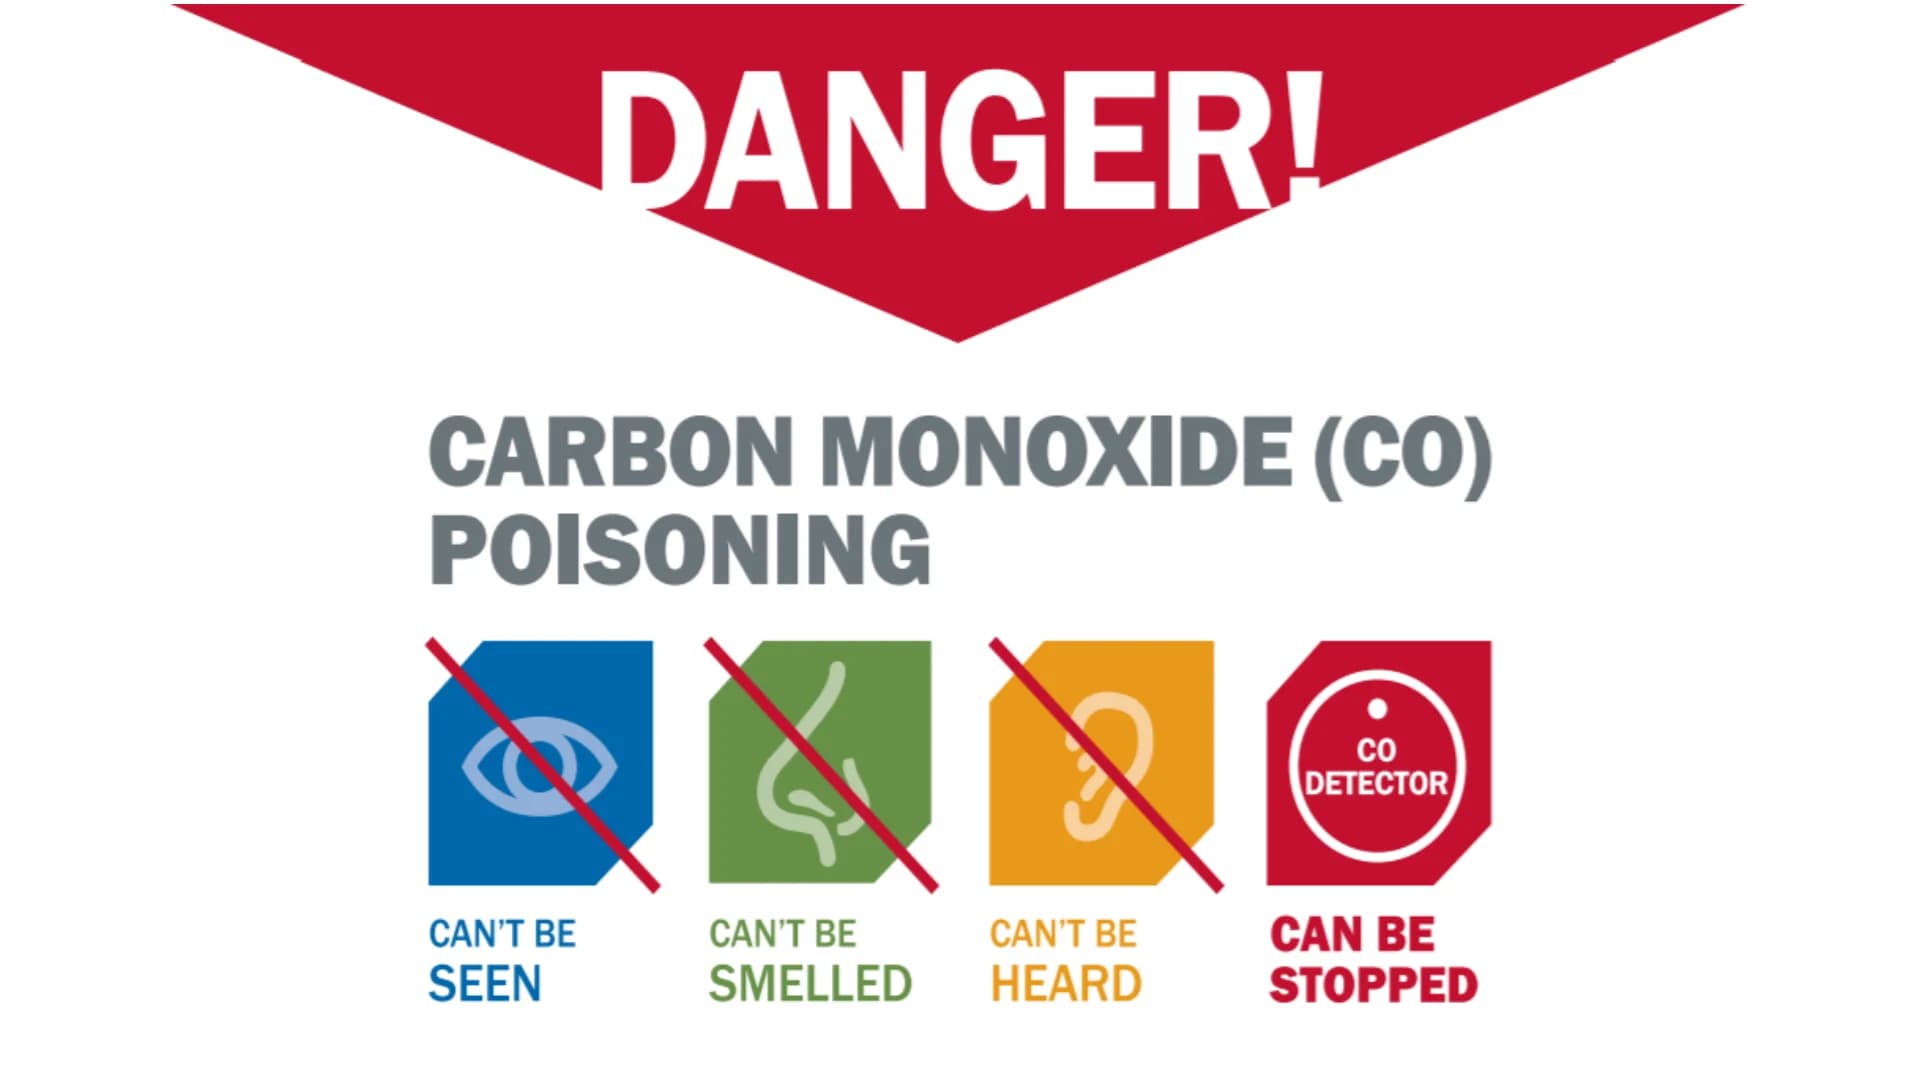 Guide: Tips to keep yourself and your loved ones safe from carbon monoxide poisoning